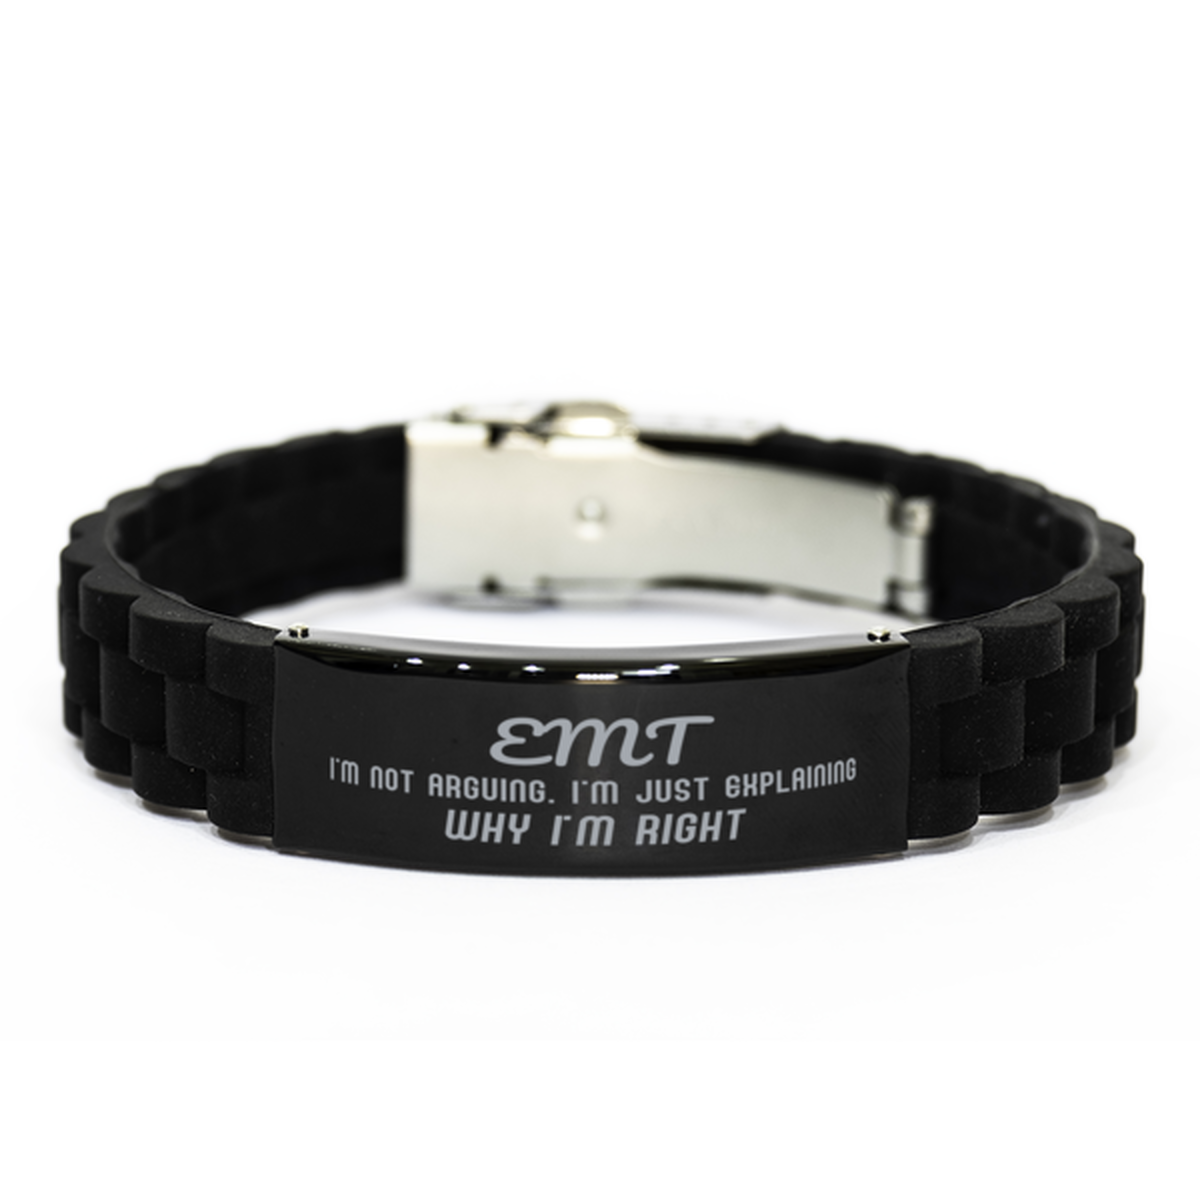 EMT I'm not Arguing. I'm Just Explaining Why I'm RIGHT Black Glidelock Clasp Bracelet, Funny Saying Quote EMT Gifts For EMT Graduation Birthday Christmas Gifts for Men Women Coworker